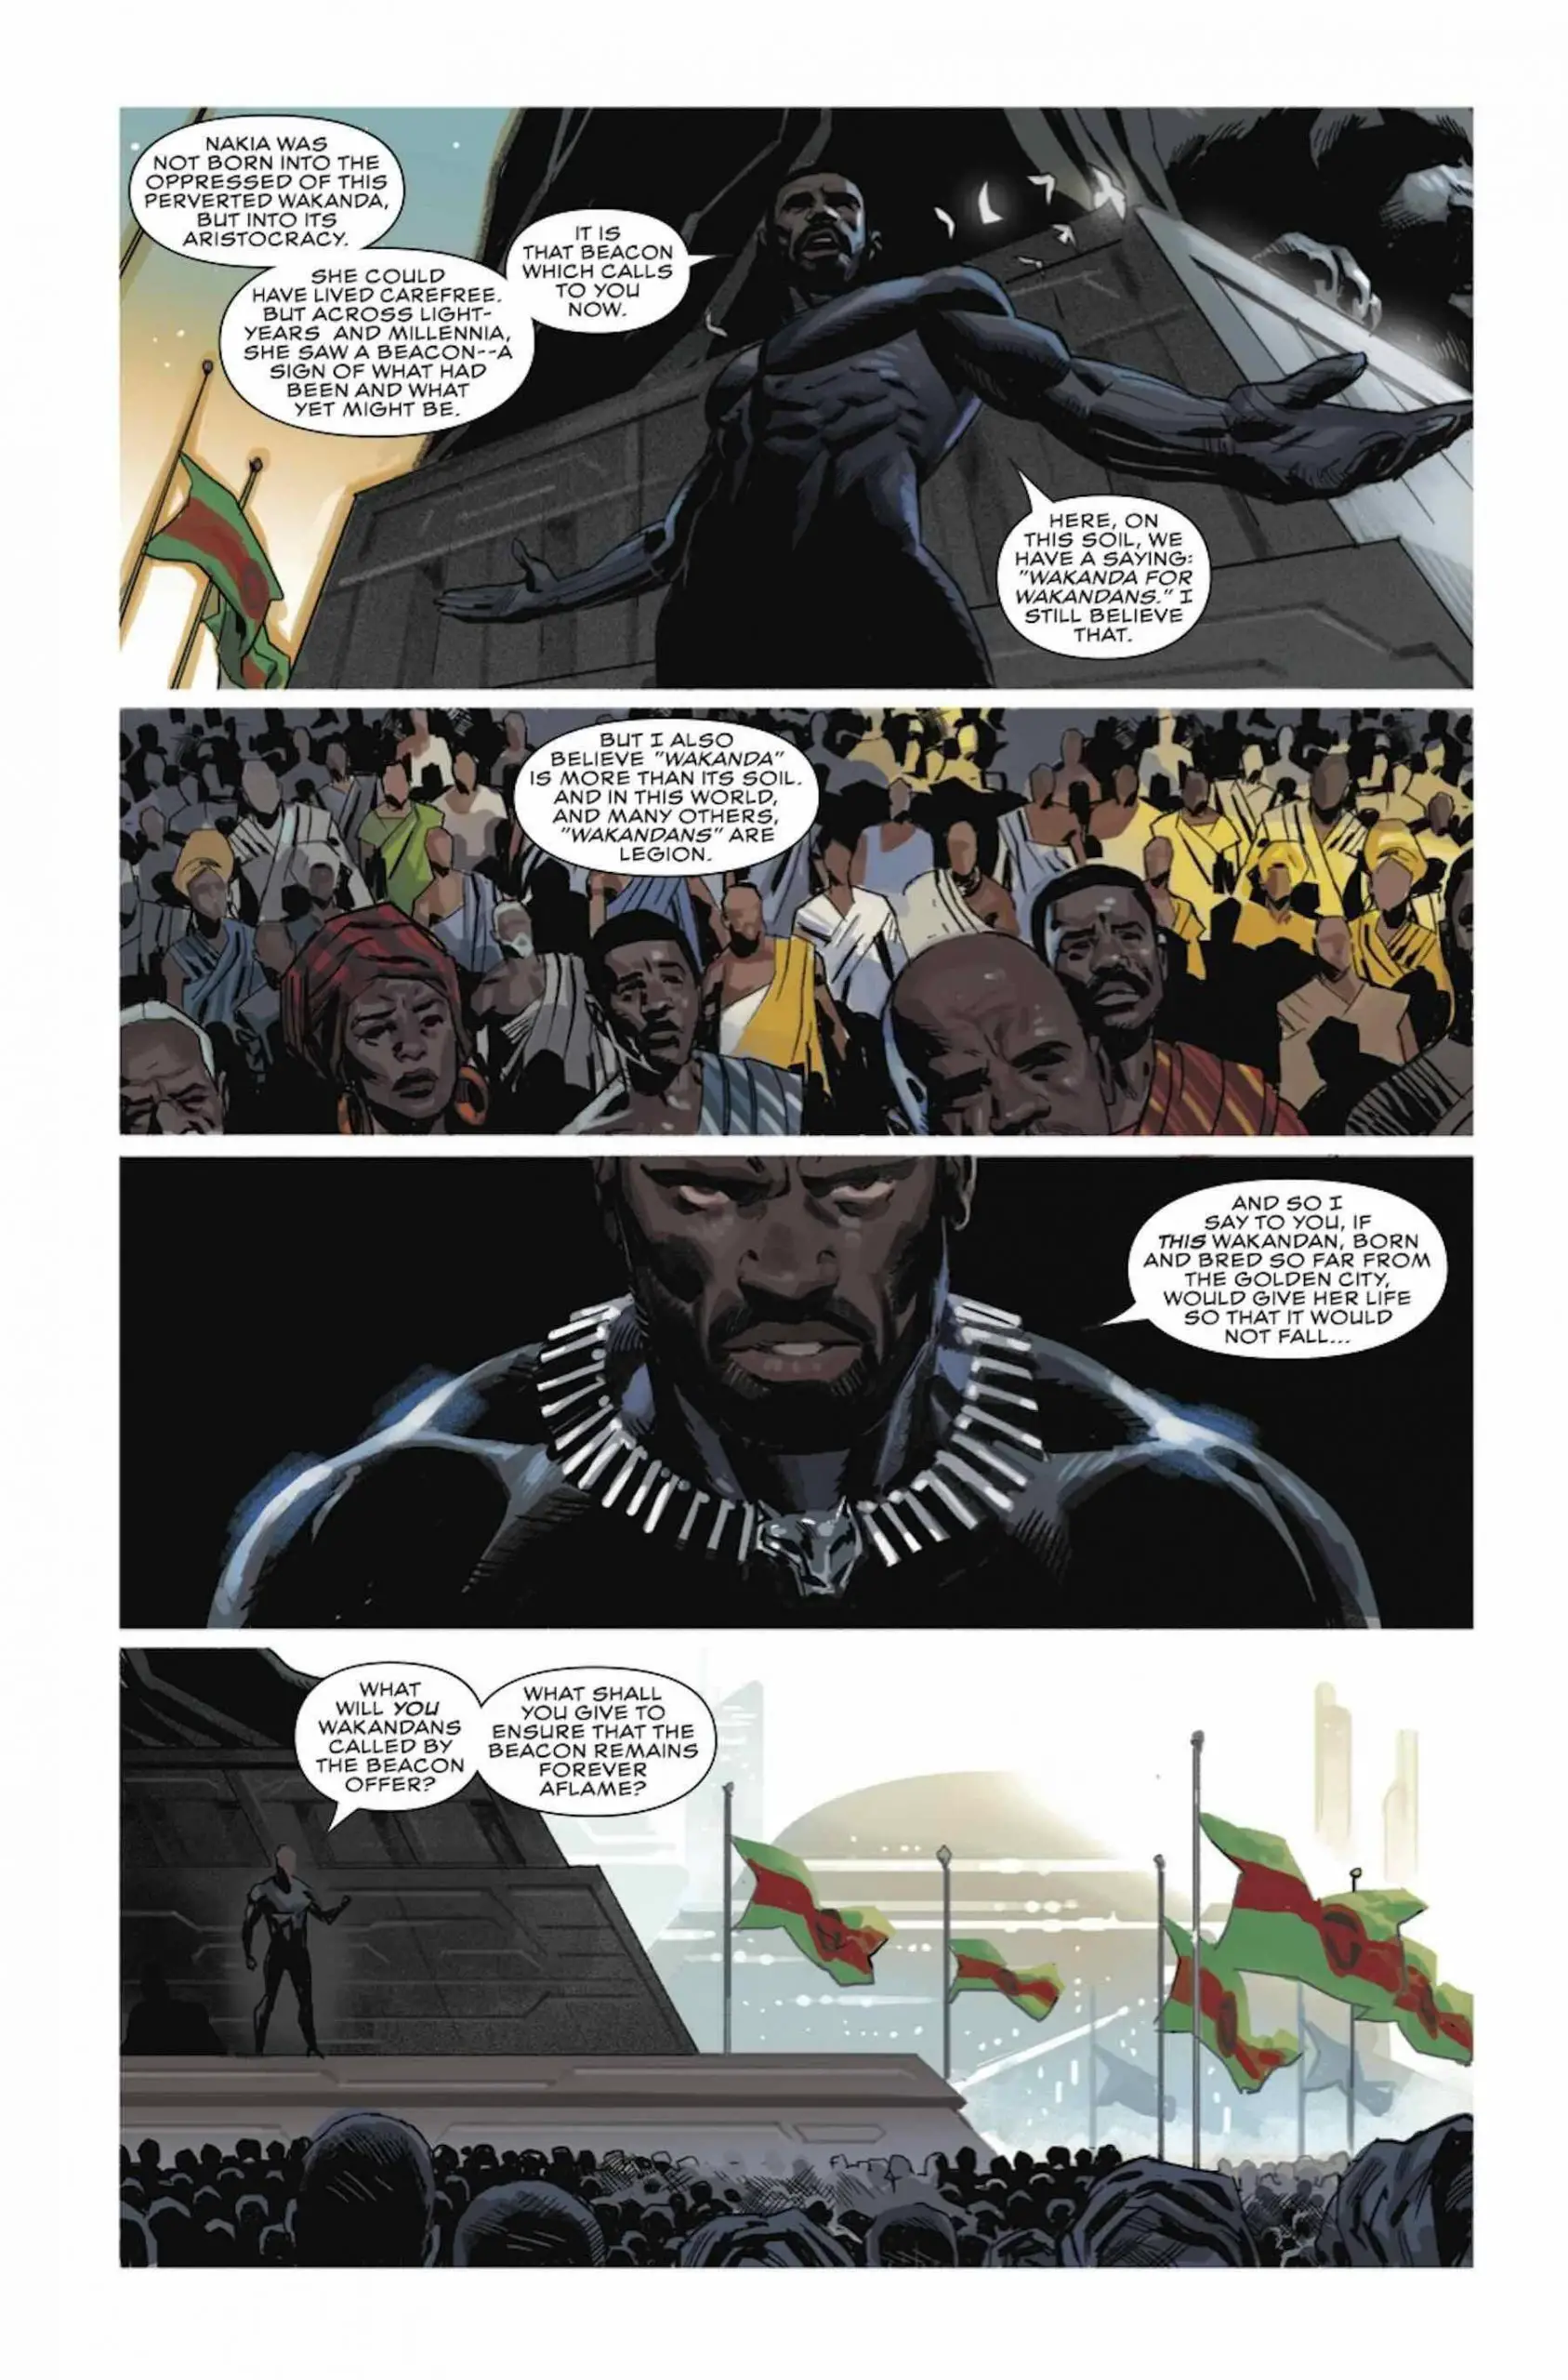 BLACK PANTHER #23 preview pages by Daniel Acuña and Ryan Bodenheim